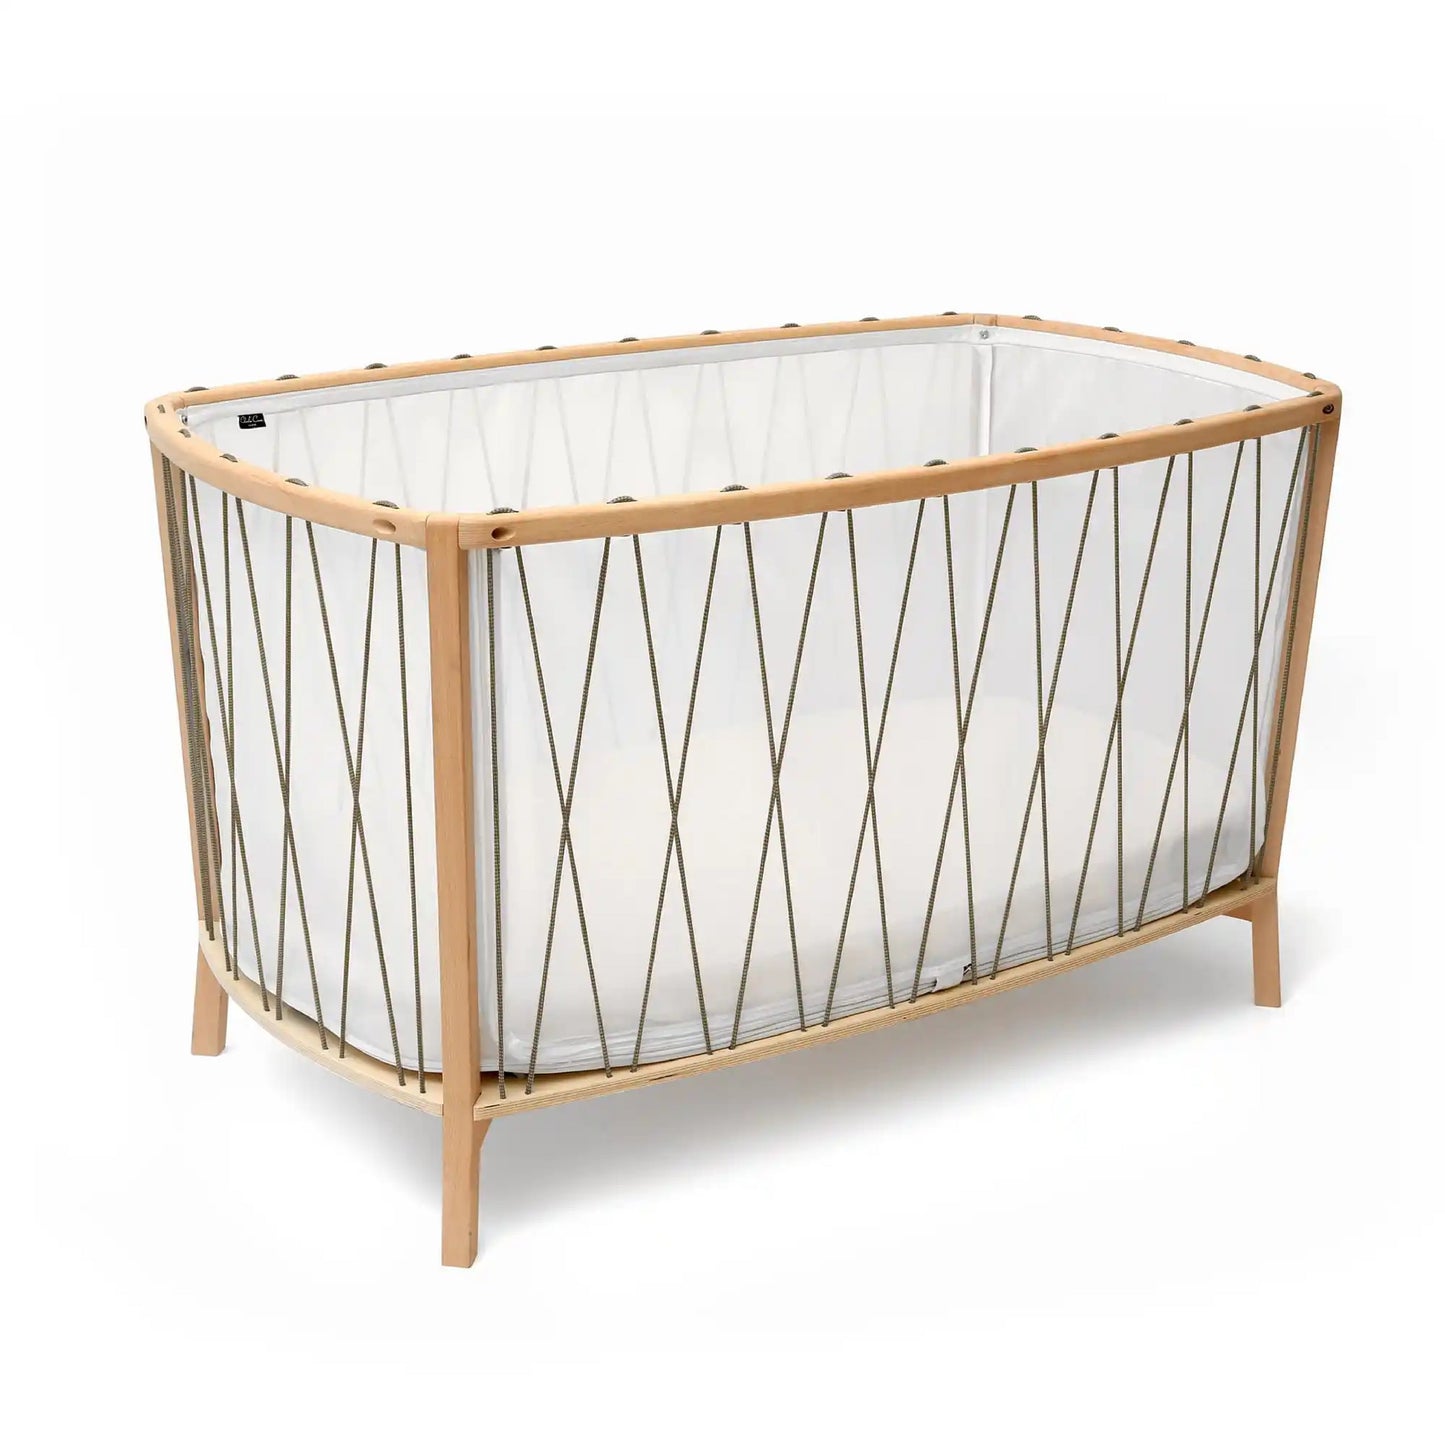 KIMI Baby Bed